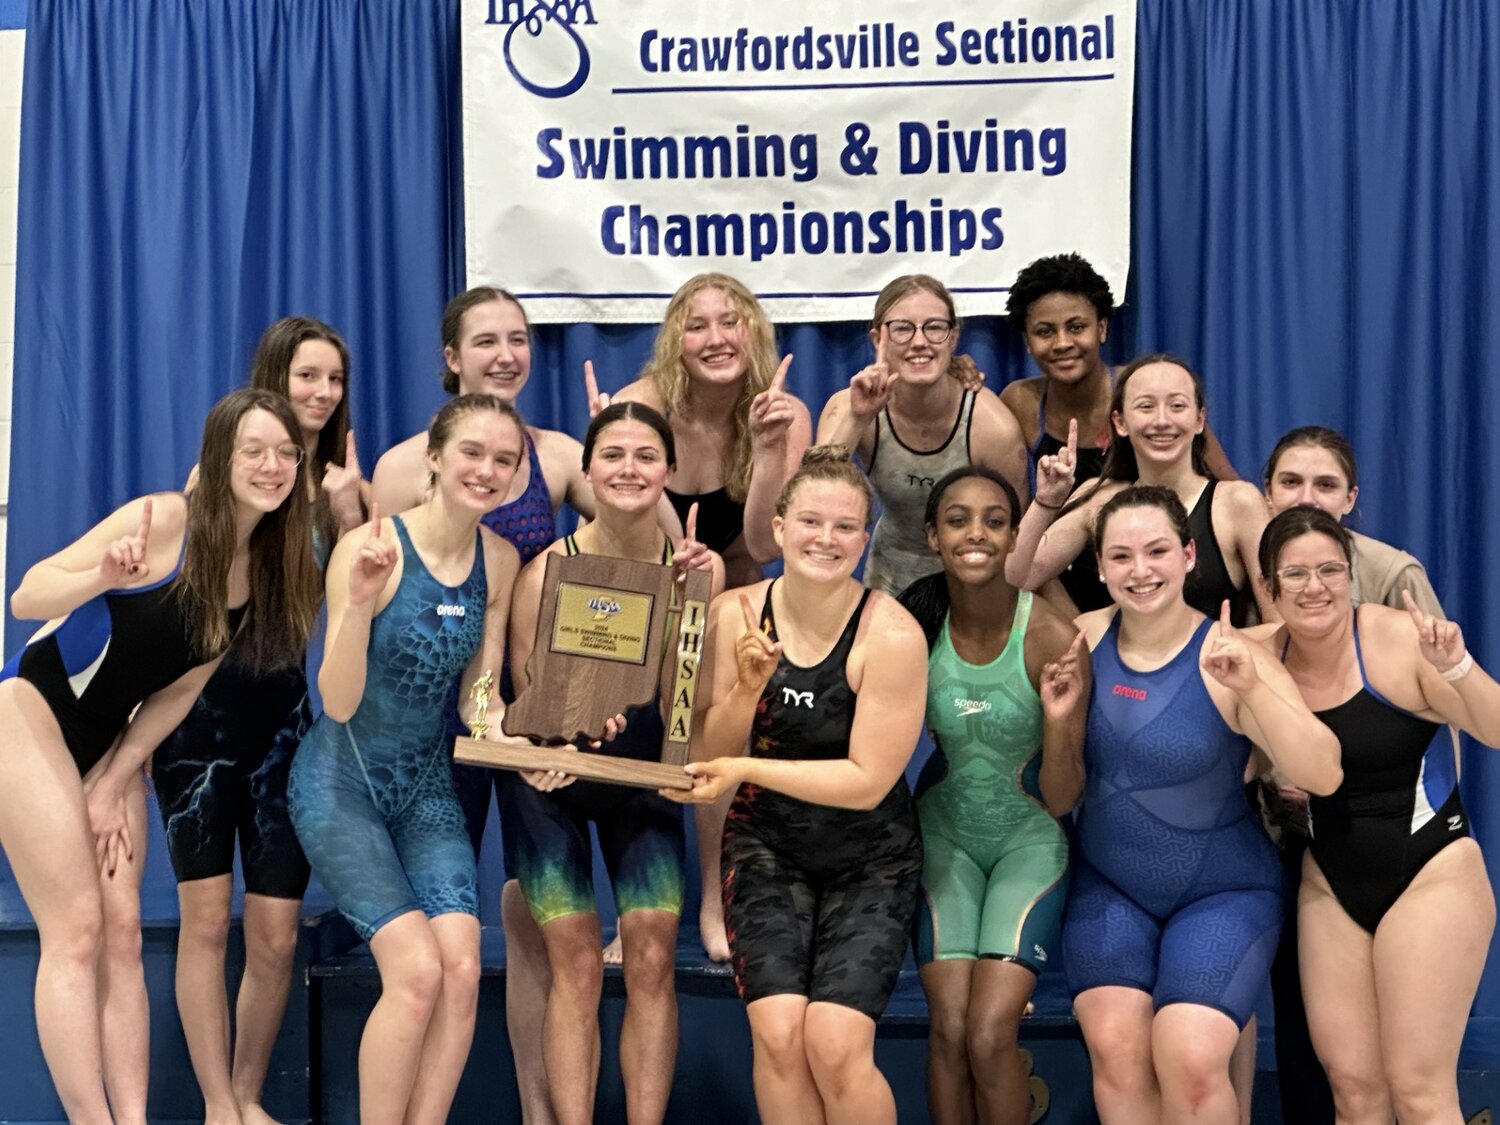 Crawfordsville girls swimming held off county rival North Montgomery on Saturday to win its first sectional title since 2019. CHS will send six swimmers — Maesa Horton, Marie Hesler, Ellie Walker, Sophia Melebage, Melanie Dowd and Guinevere Schmitzer-Torbert ­— to the state finals prelims on Friday at IUPUI.